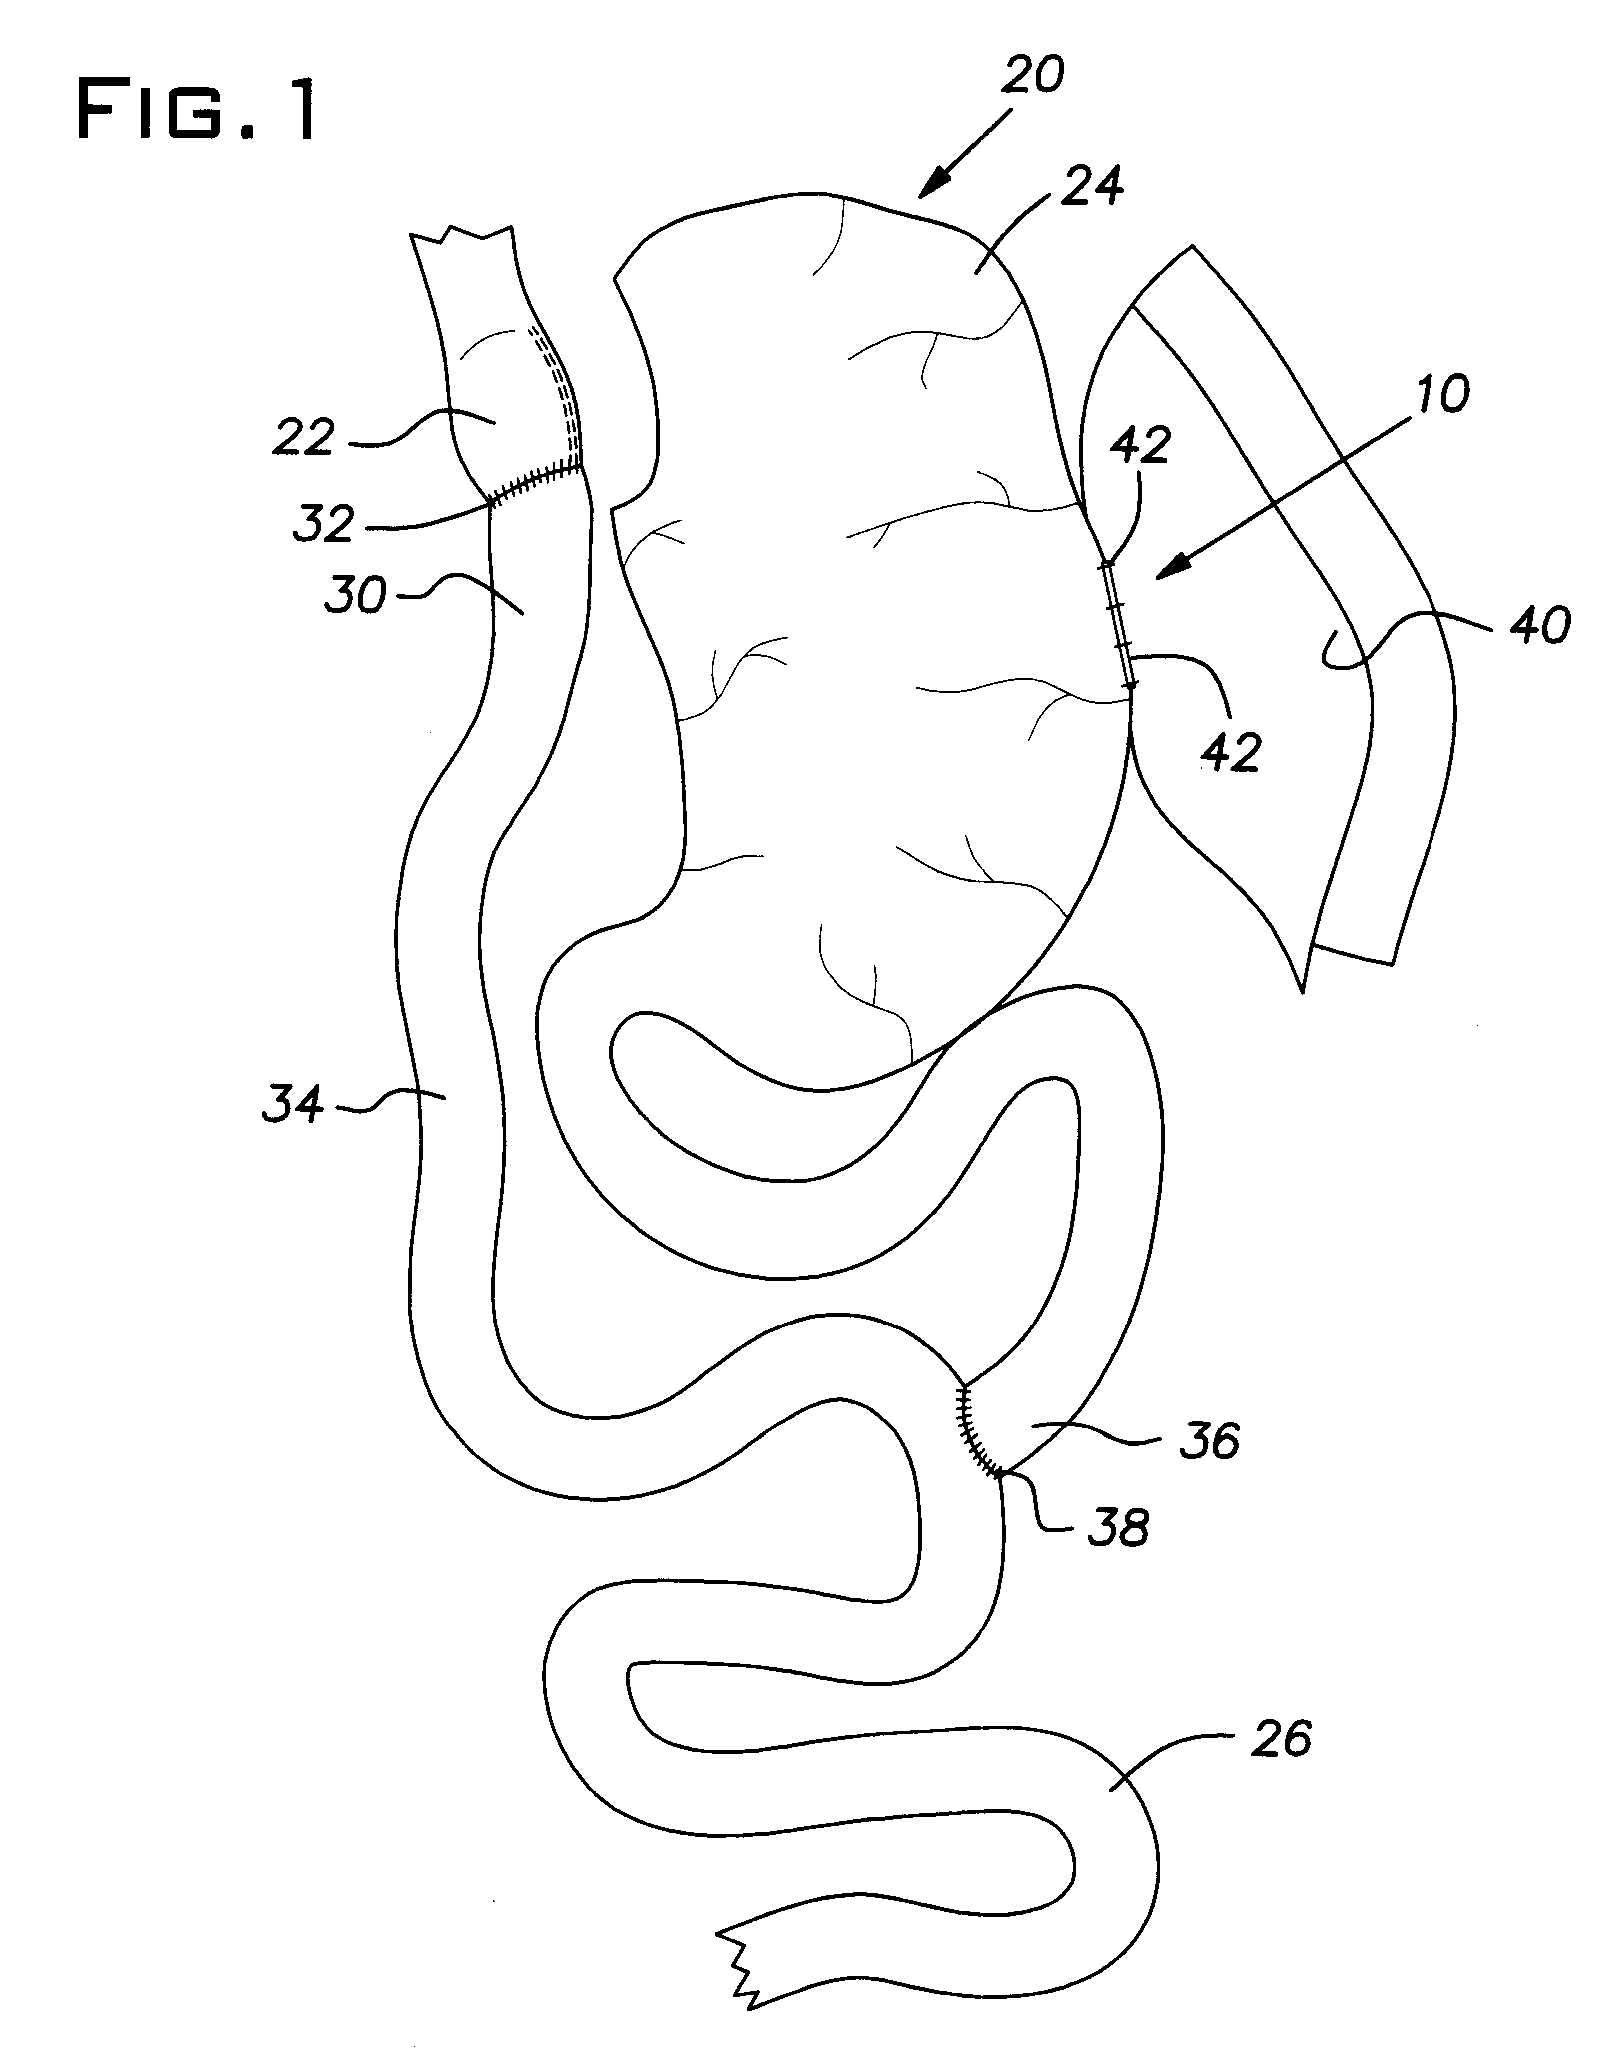 Surgical marker/connector and method of installation